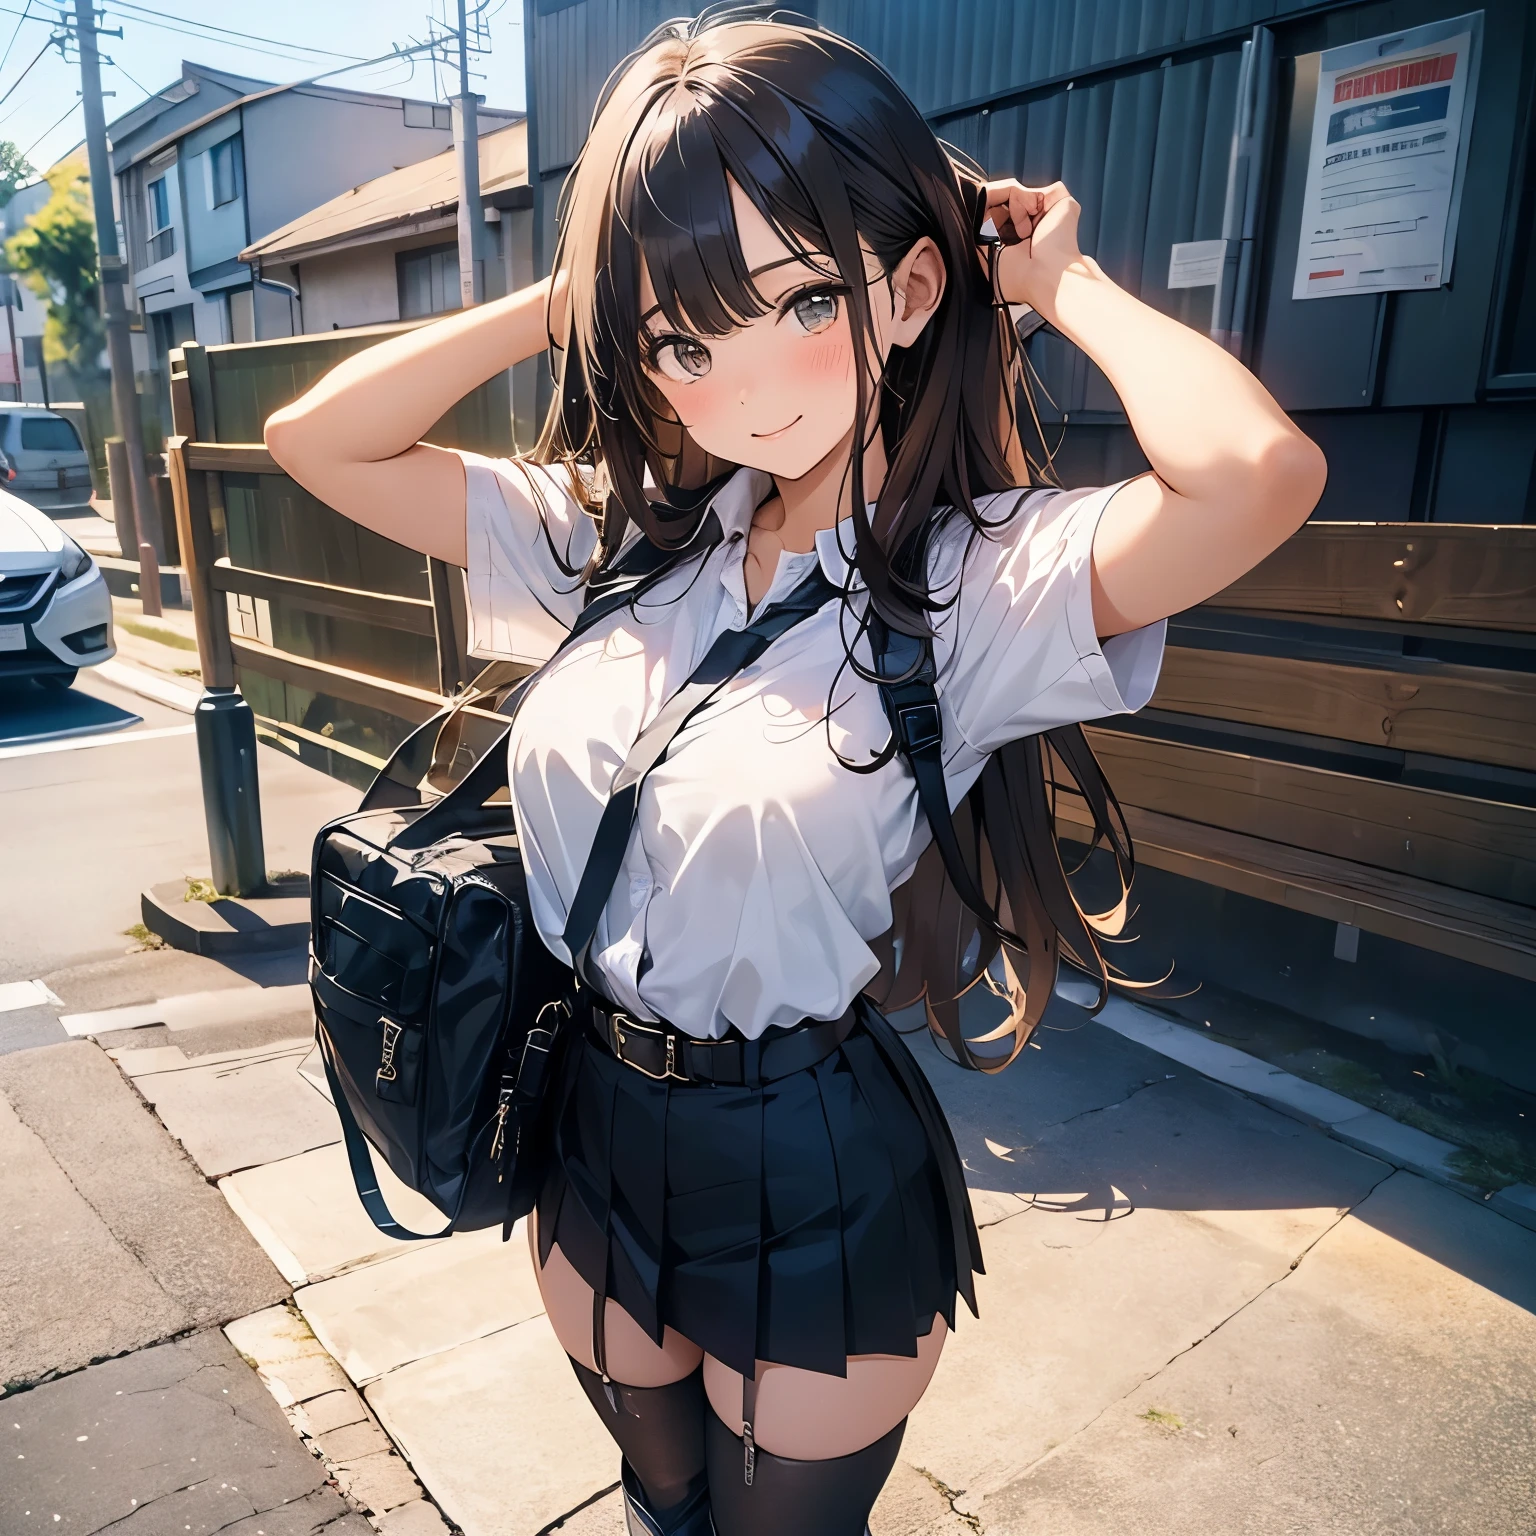 Brown hair、watching at viewers　　　black suspenders　　　Bulging big breasts　　 　 　　　walls: 　Black miniskirt　garters　　　　　　Gaze　　　Small face　bangss 　　　holster　　　Beautuful Women　　hands up　　レッグholster ベッドに横たわる　　Gaze 　black boots panty shot　provocation　flank　flank汗　soio 　arm　inside of a car　Fold your hands behind your back　a belt